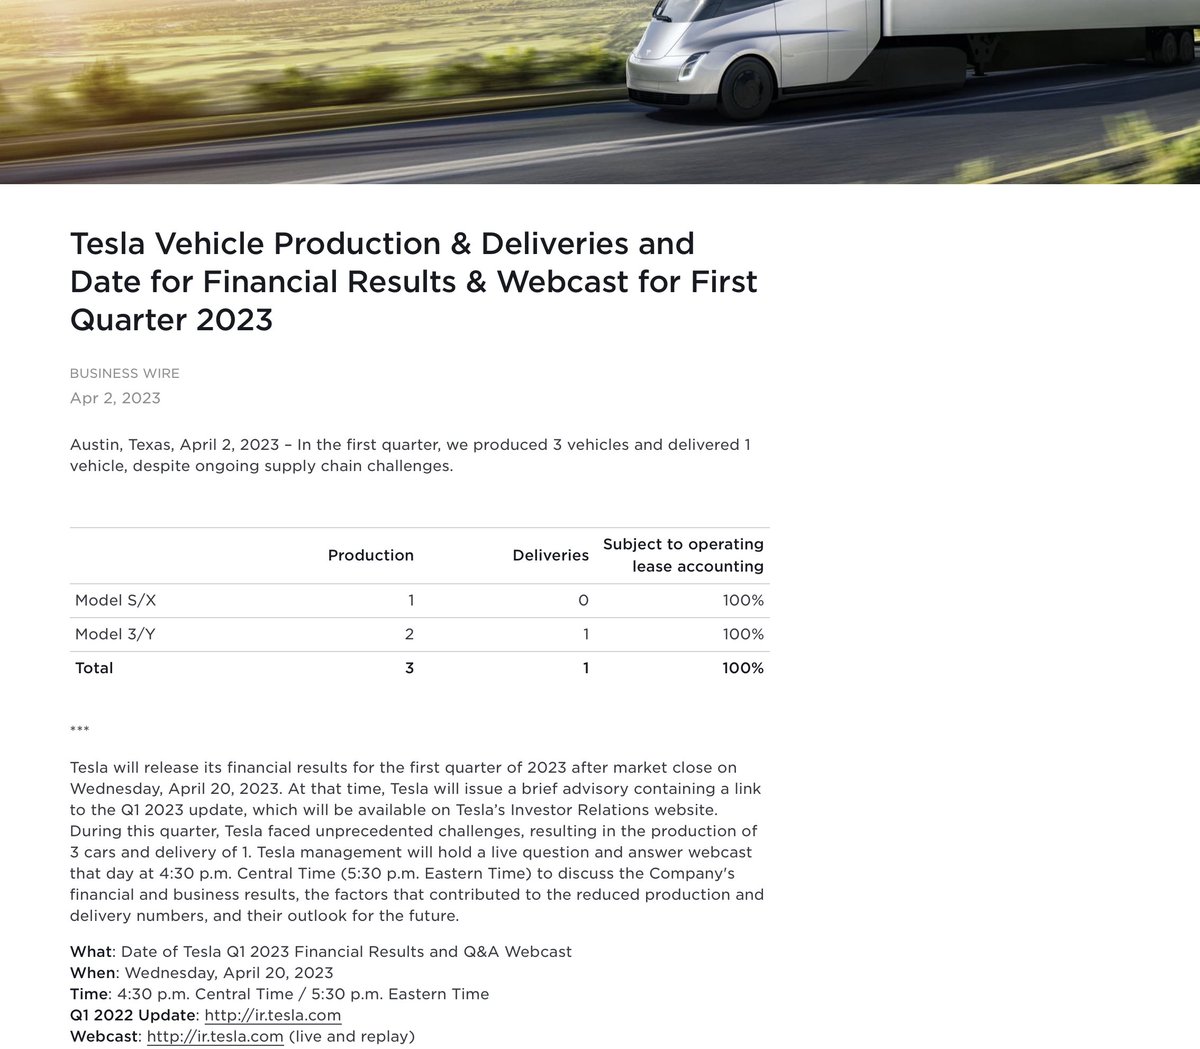 Whole Mars Catalog on Twitter "Tesla Q1 2023 Production & Deliveries"